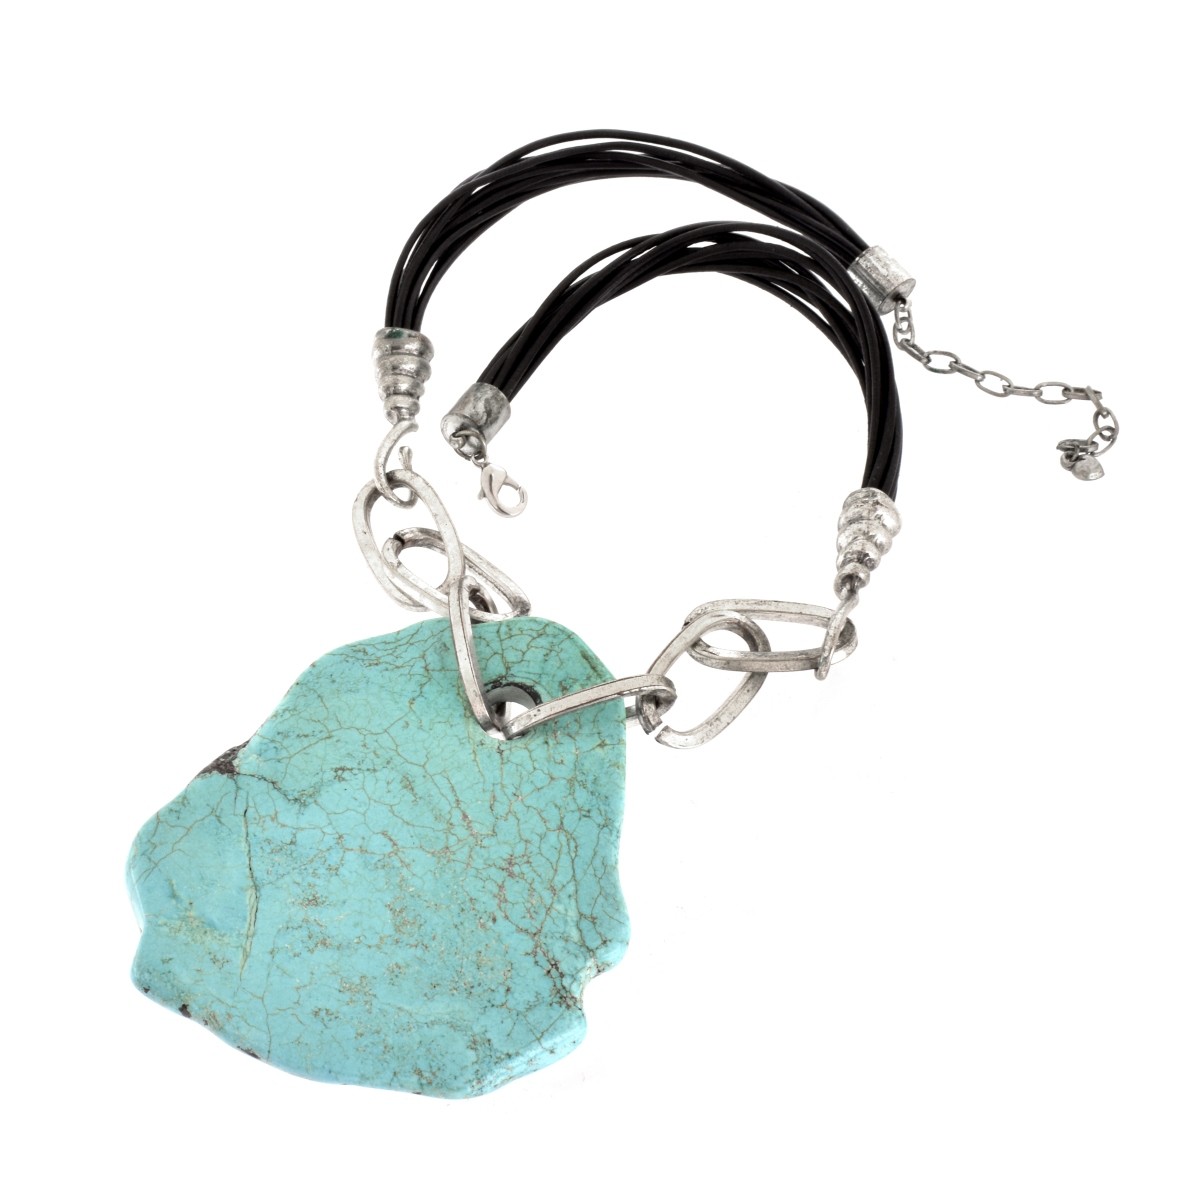 Turquoise and Leather Pendant Necklace